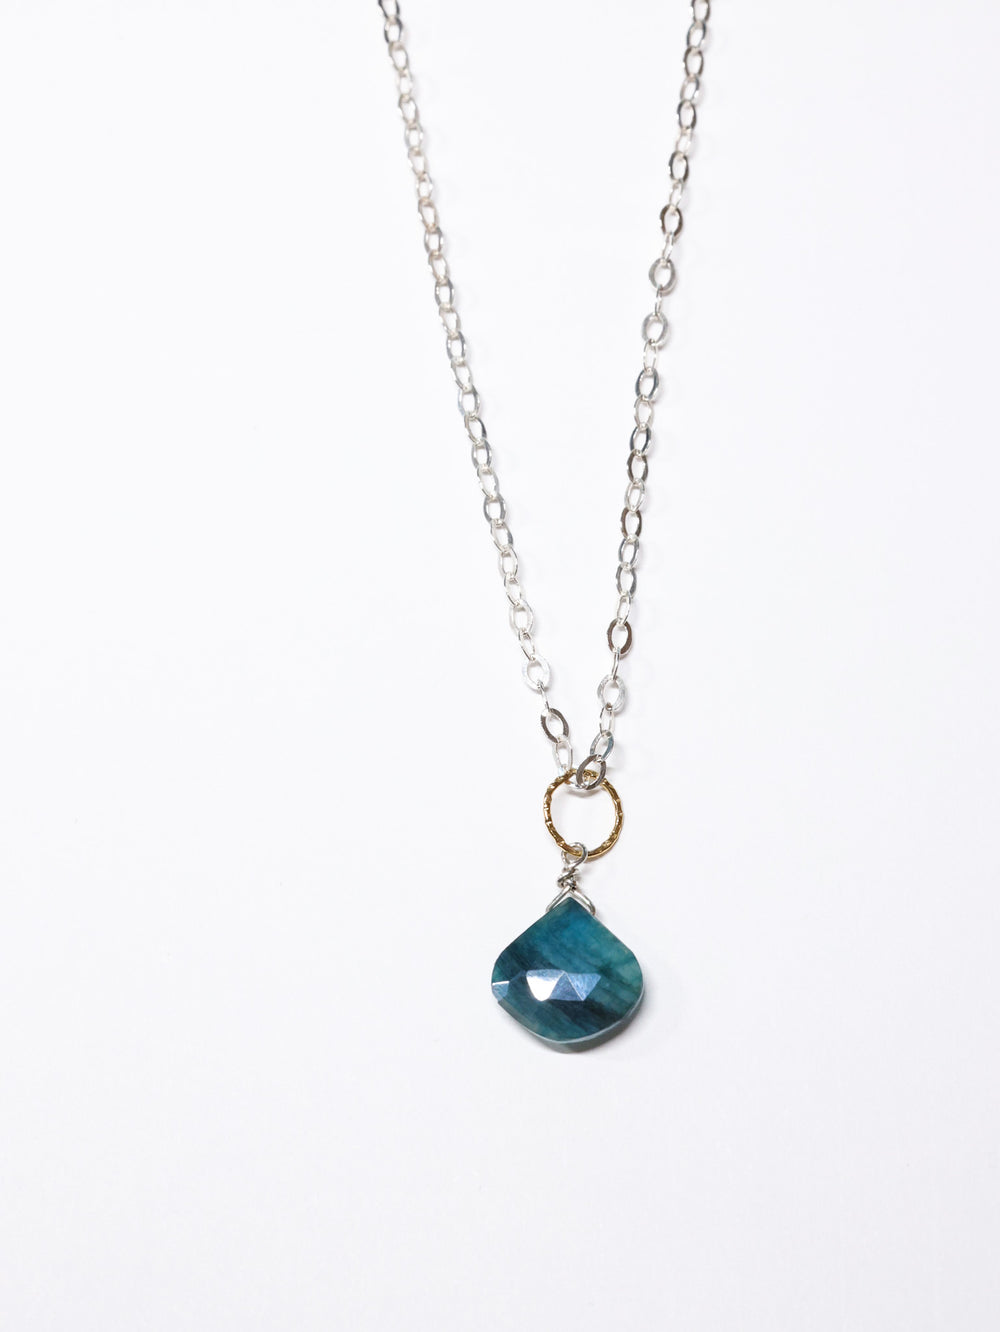 Necklace with 2 tone detail